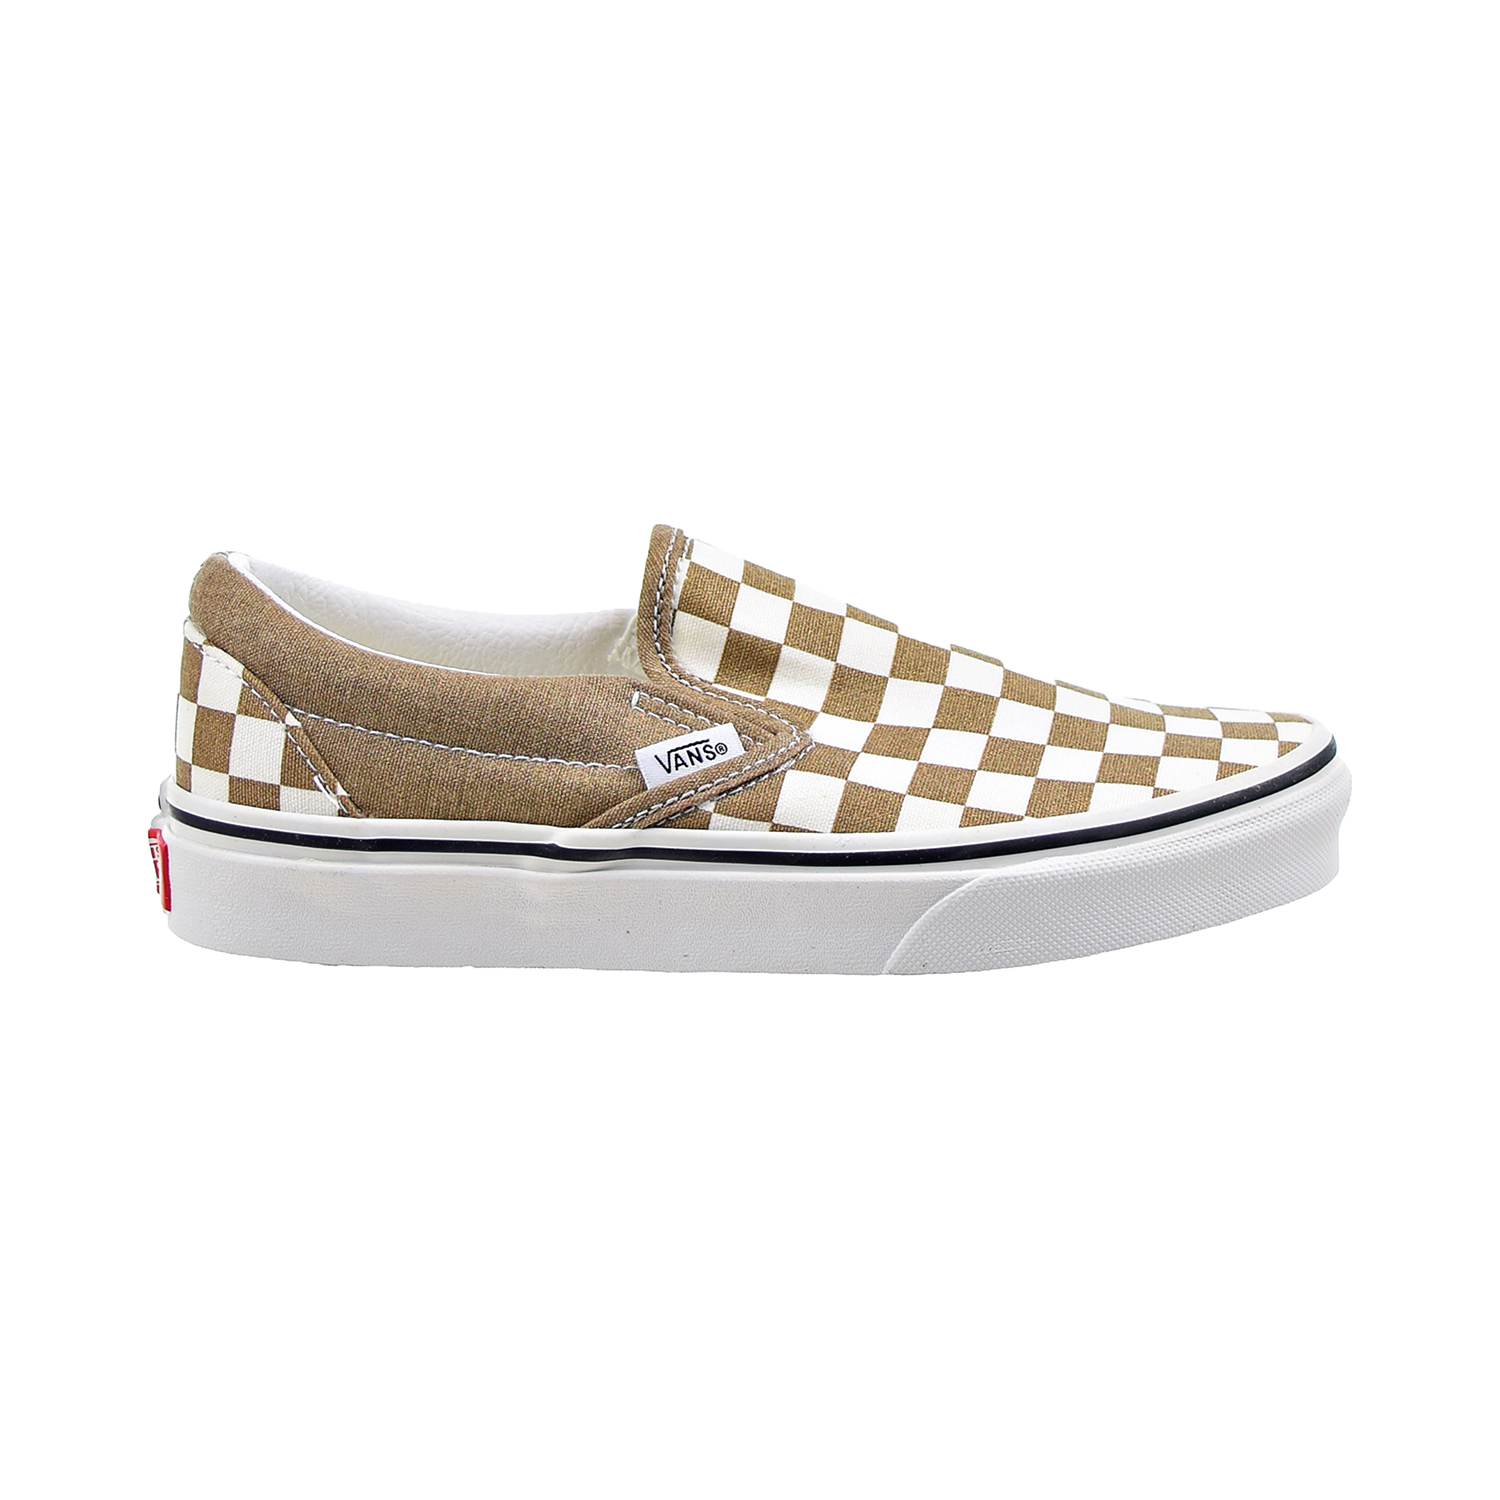 Vans Classic Slip-On Checkerboard Men's Shoes Bronze Age Sparkle-True White vn0a33tb-9ey (4 M US)